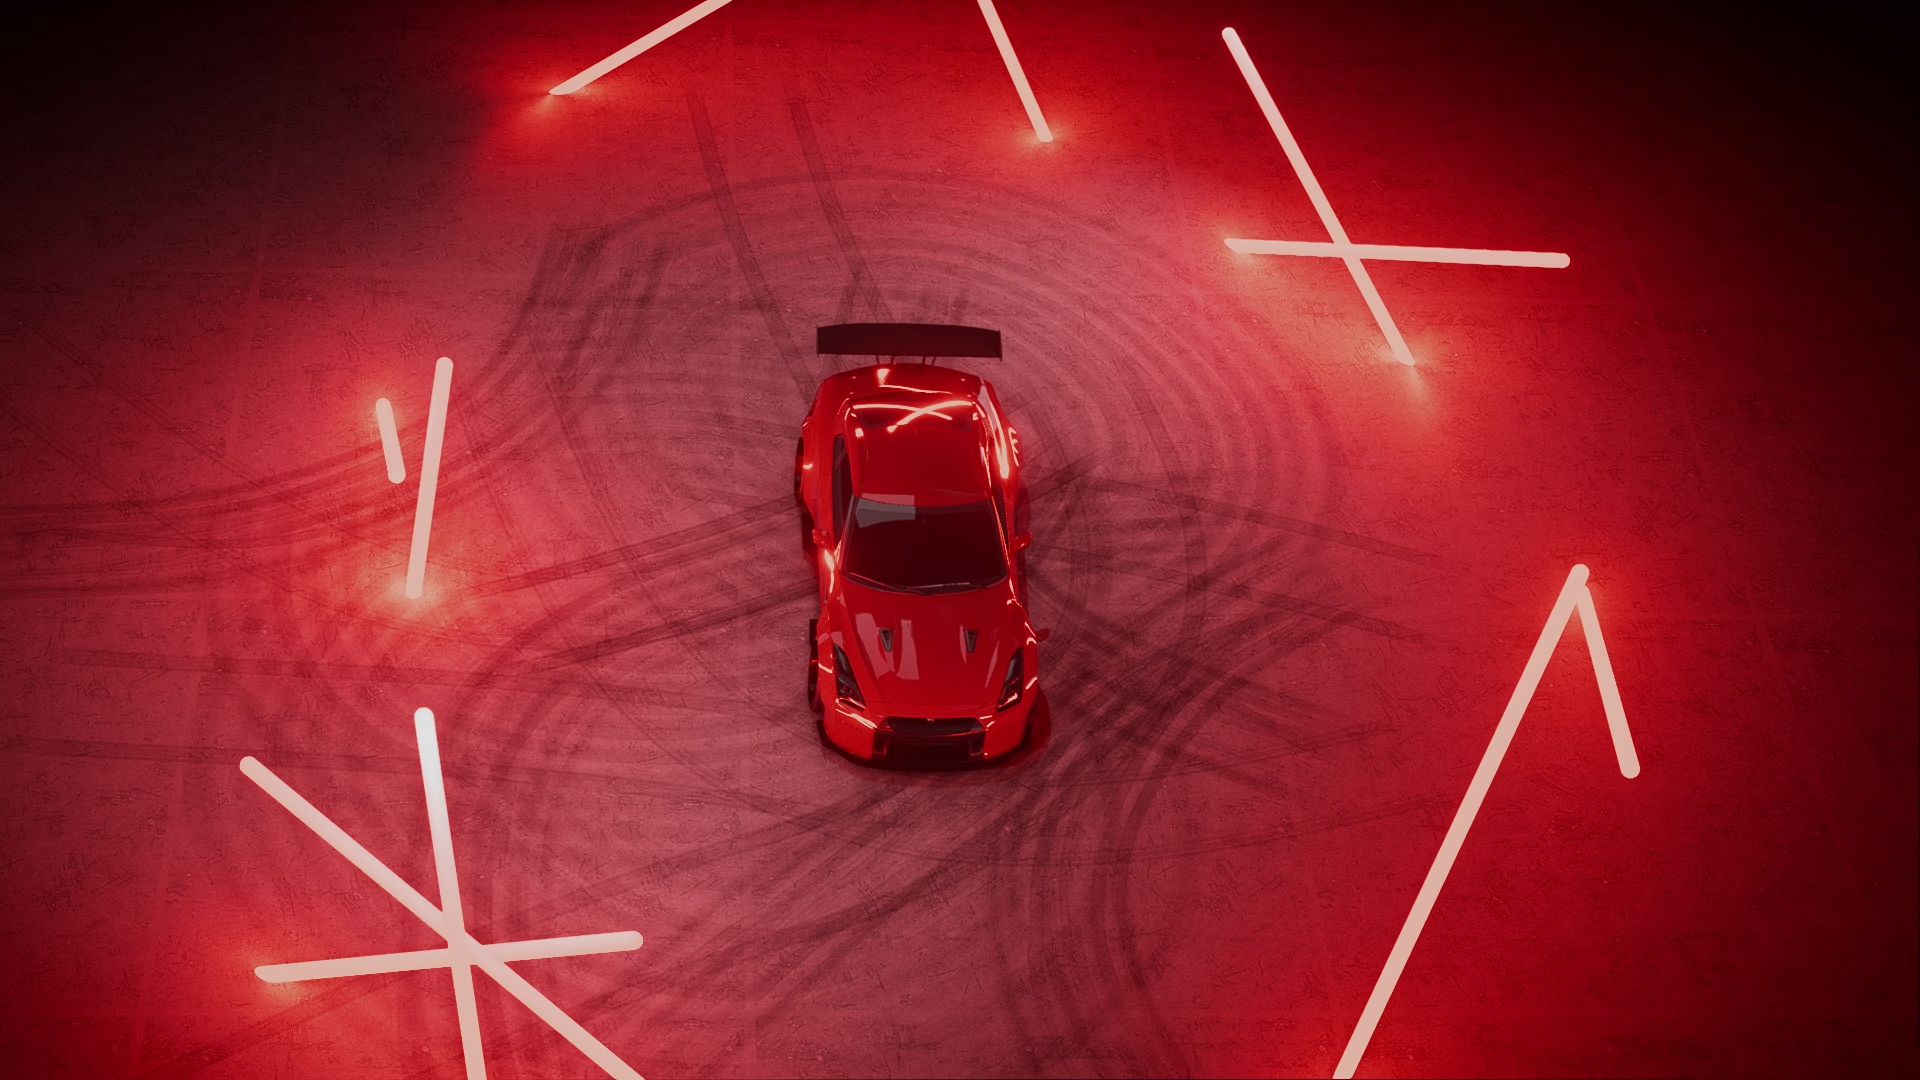 Wallpaper, lights, Nissan GTR, red, Need for Speed Payback, Need for Speed 1920x1080